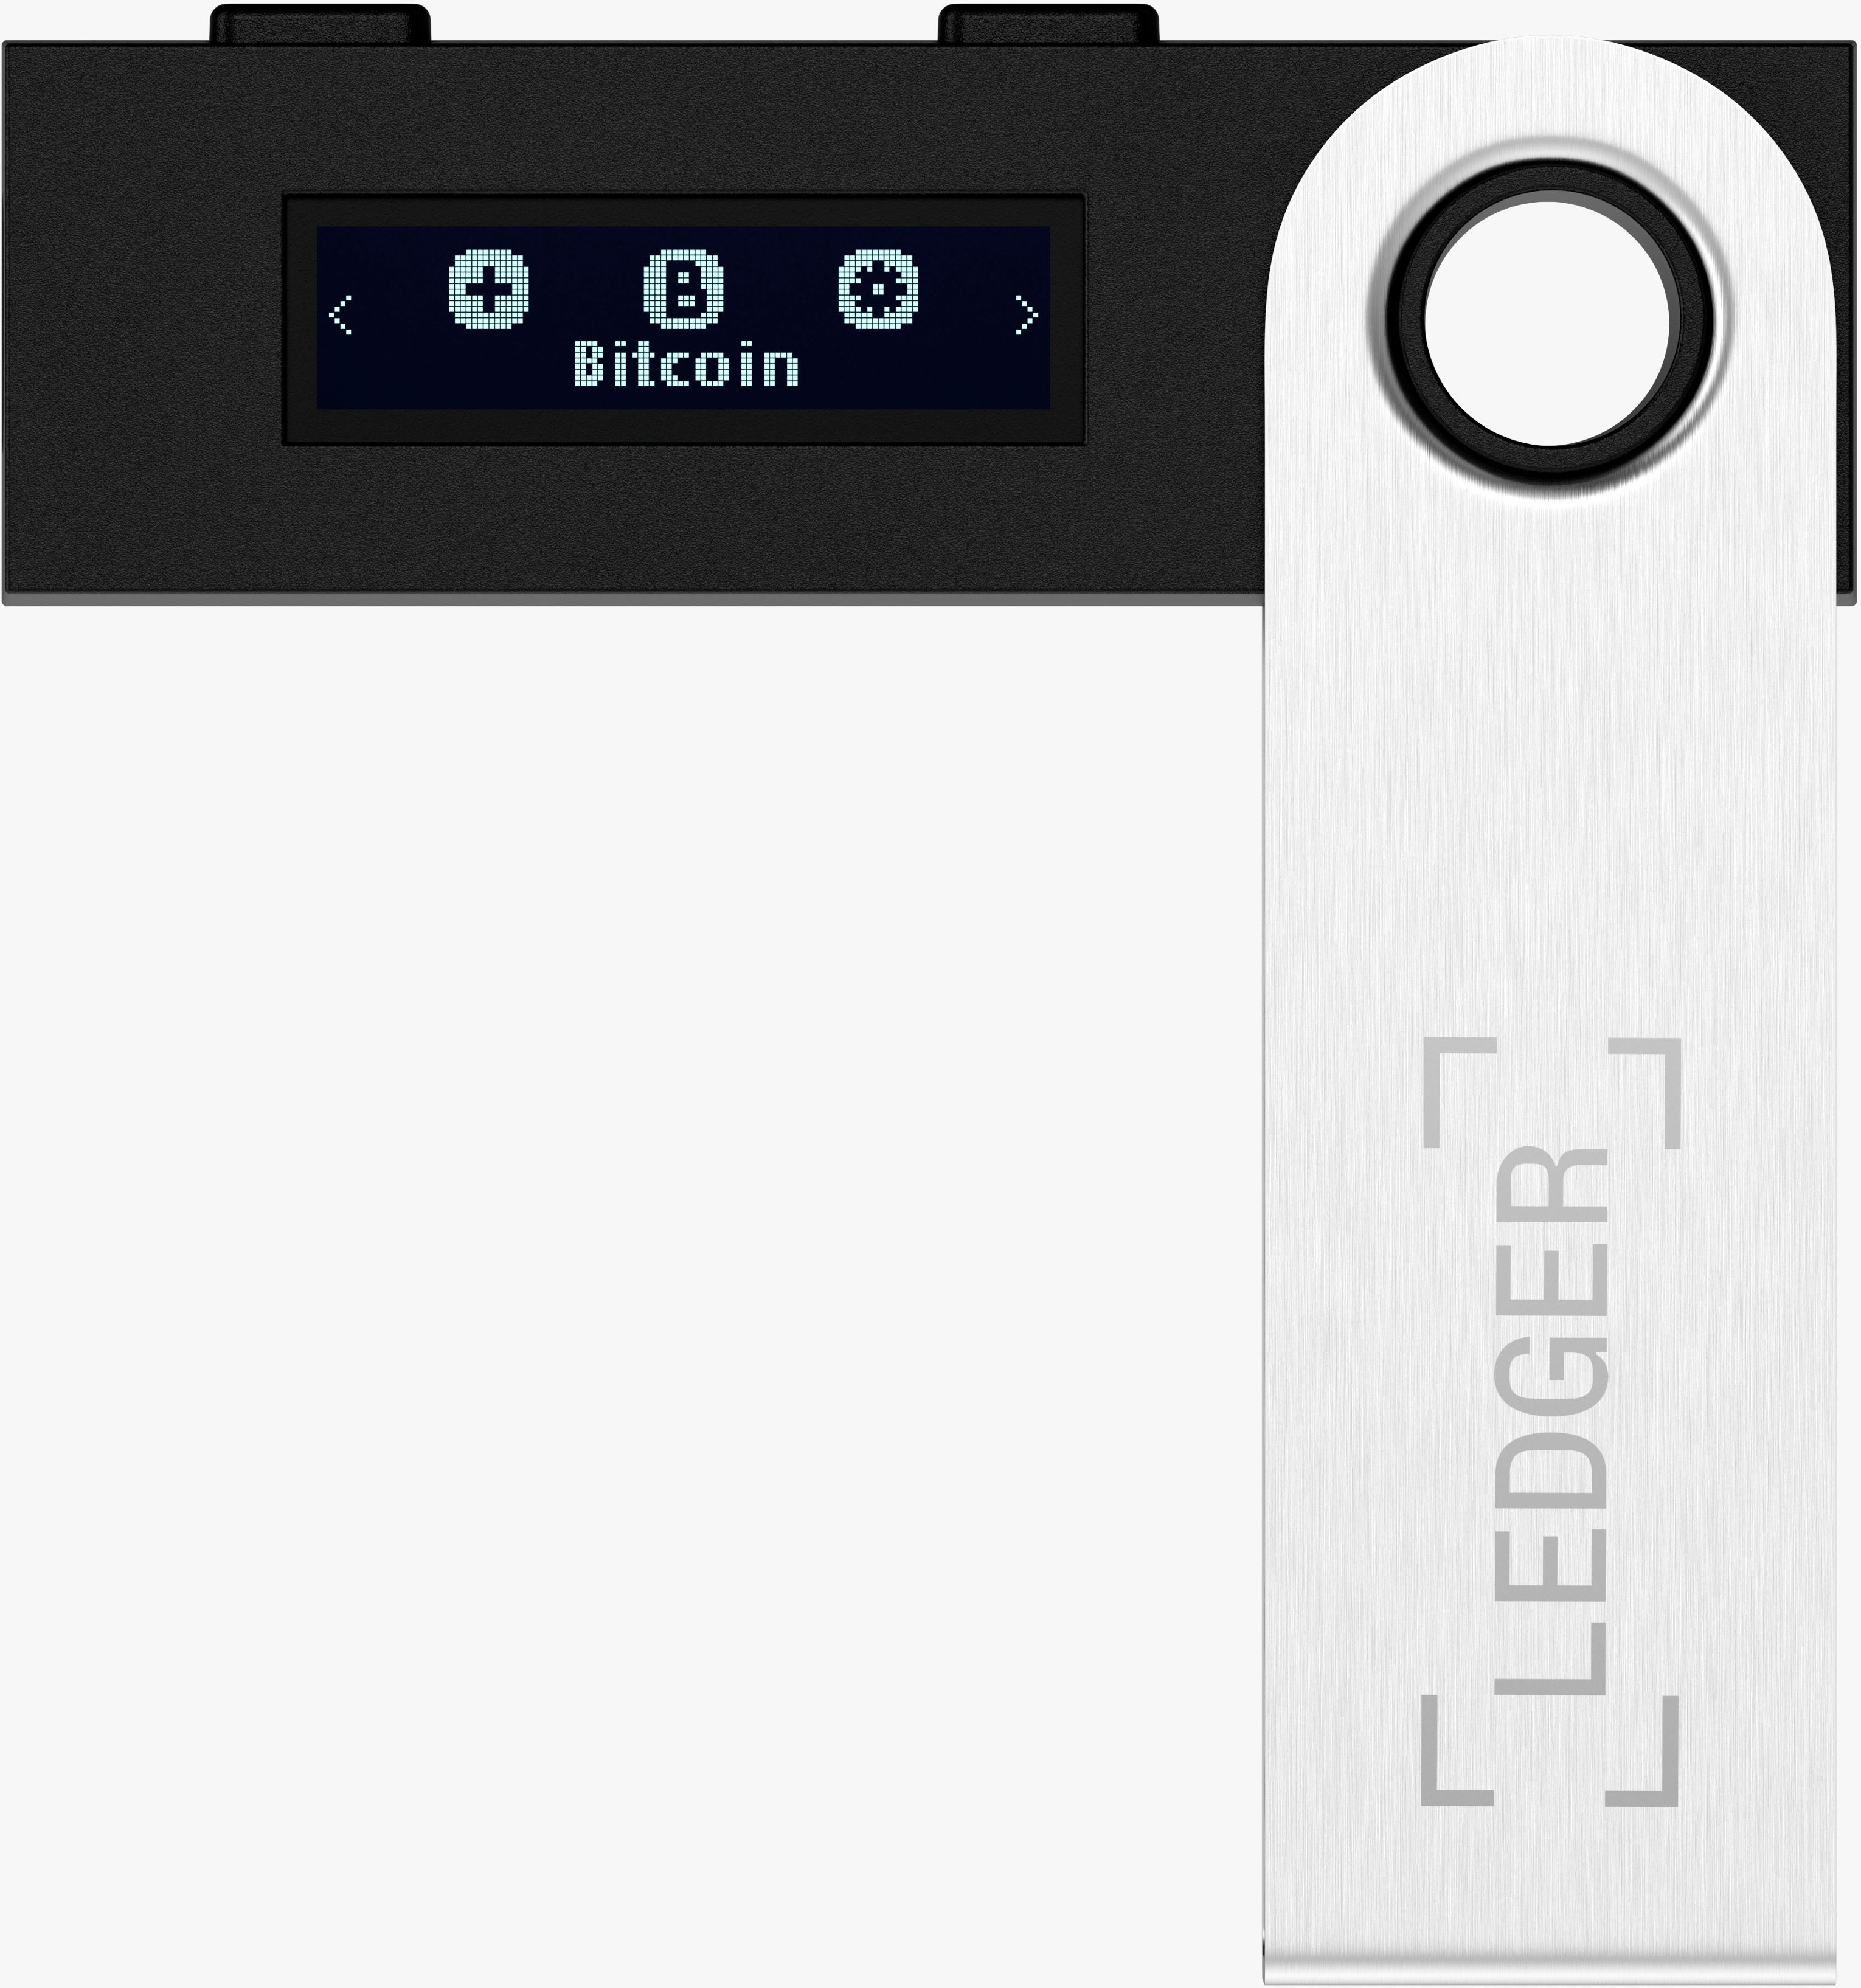 Ledger Nano S Cryptocurrency Hardware Wallet Bitcoin & Alts AUTHORIZED RETAILER 